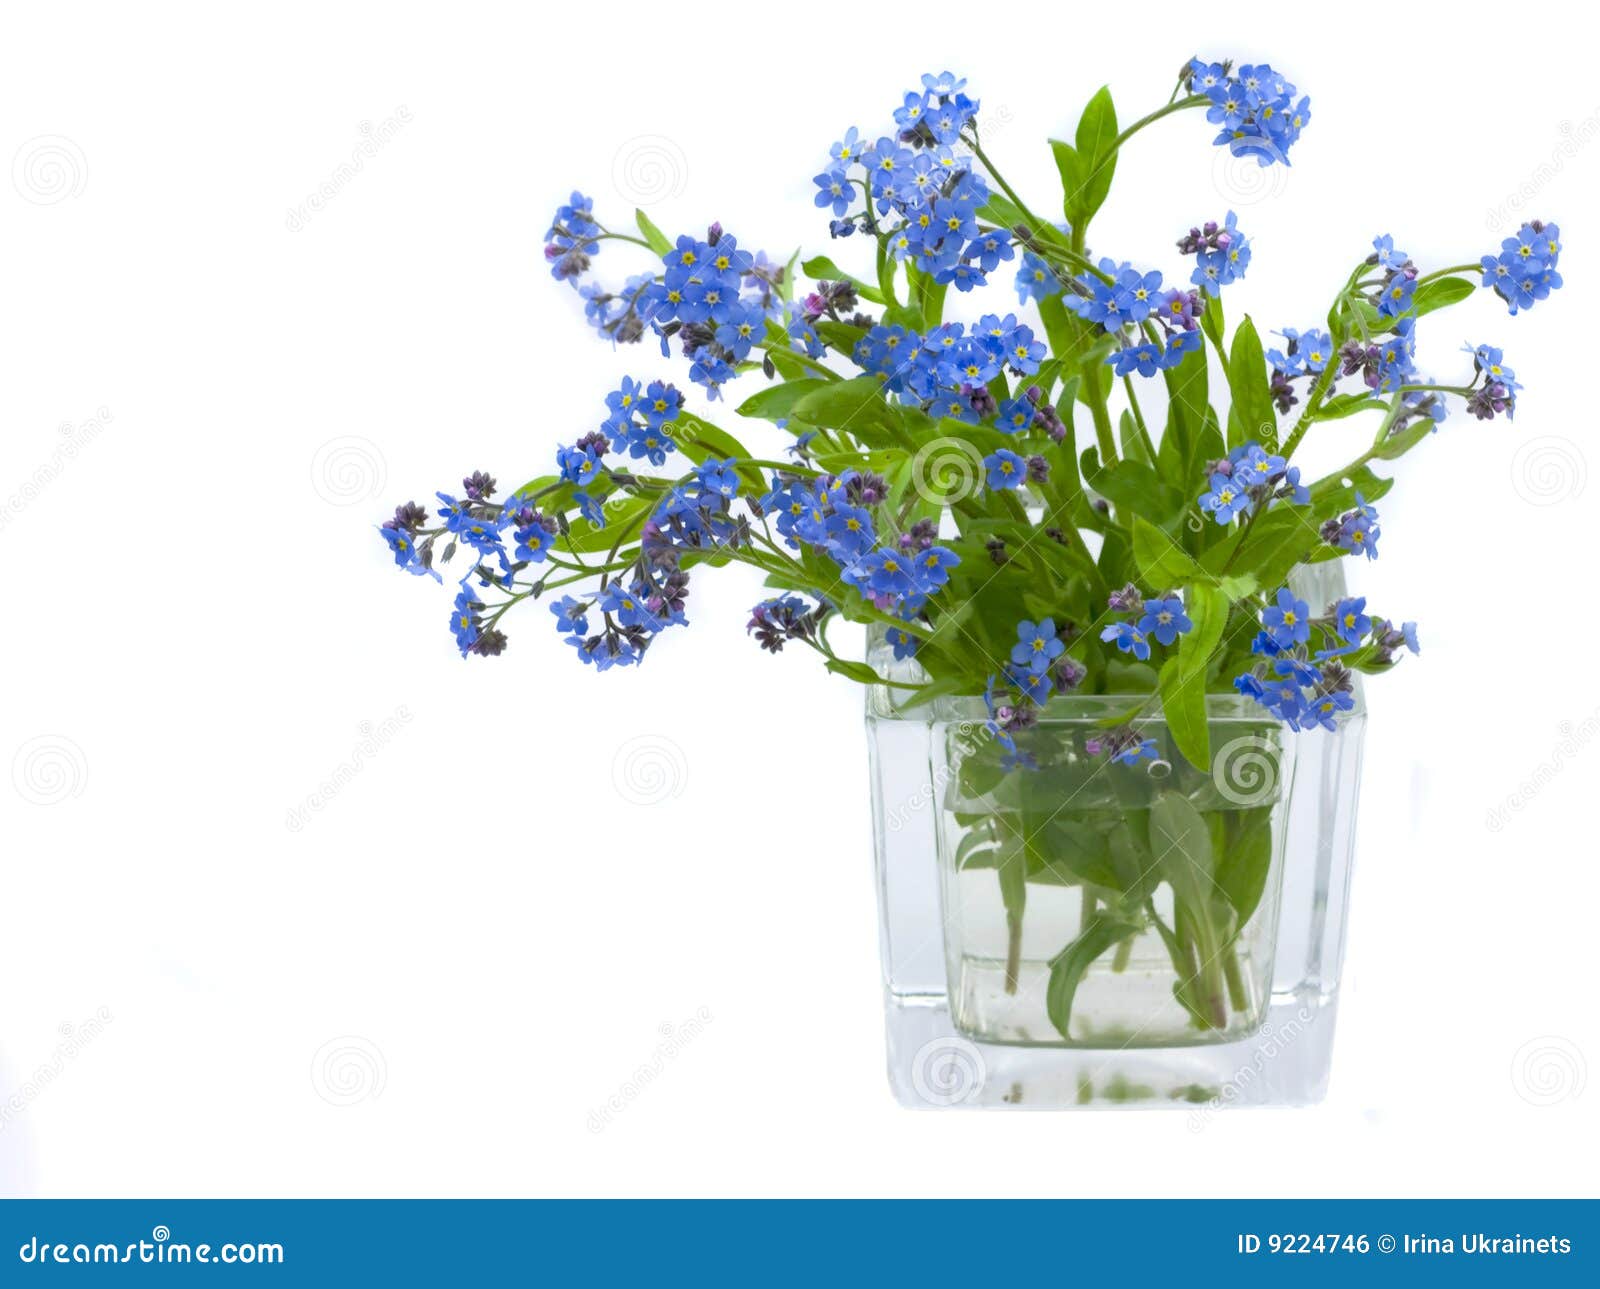 free clip art forget me not flower - photo #38